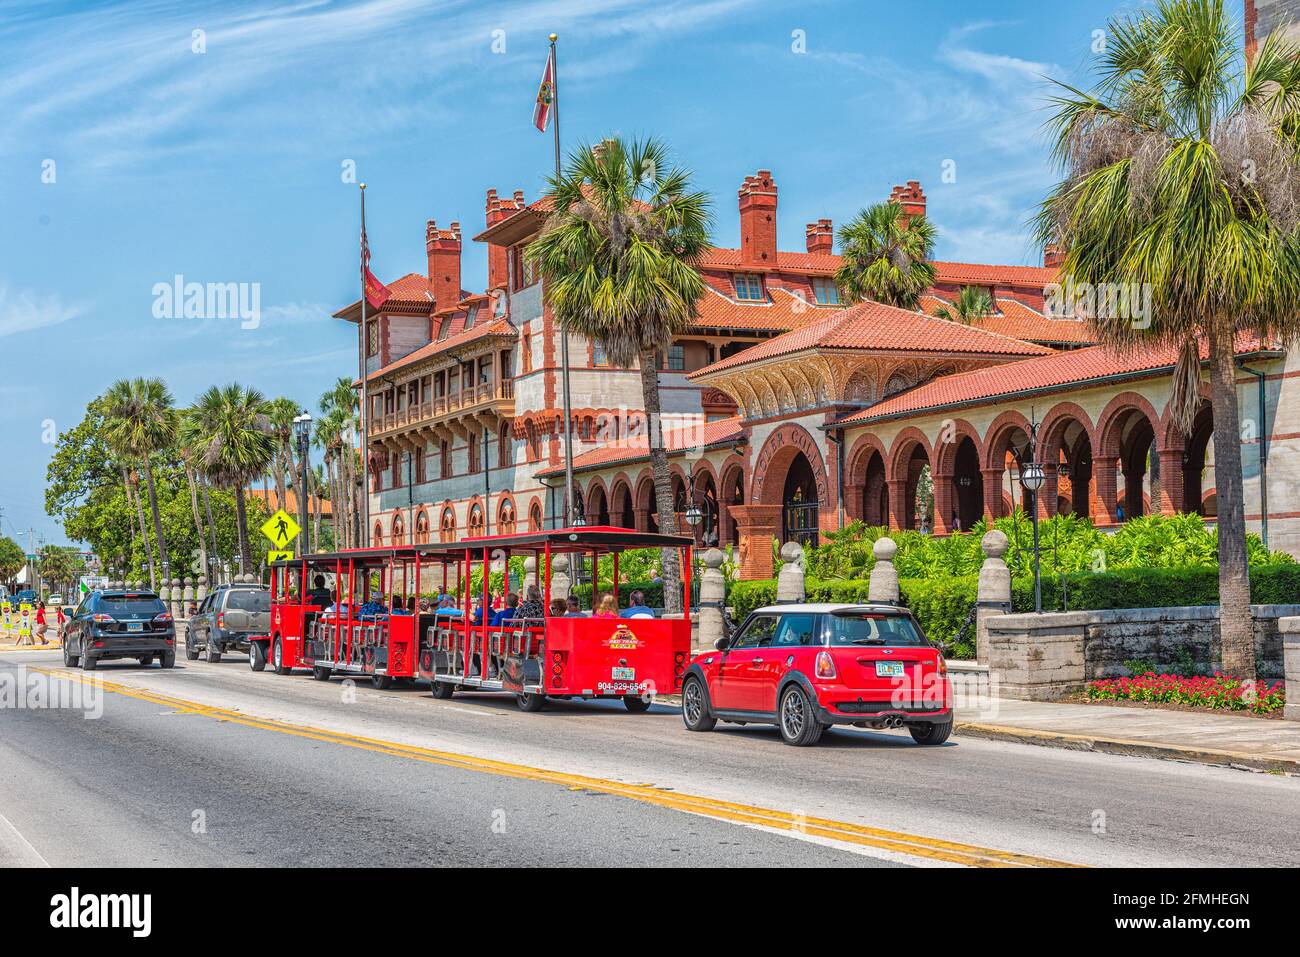 St. Augustine, USA - May 10, 2018: Flagler College with Florida architecture in historic city and red train trolley tour guide tram riding on street r Stock Photo